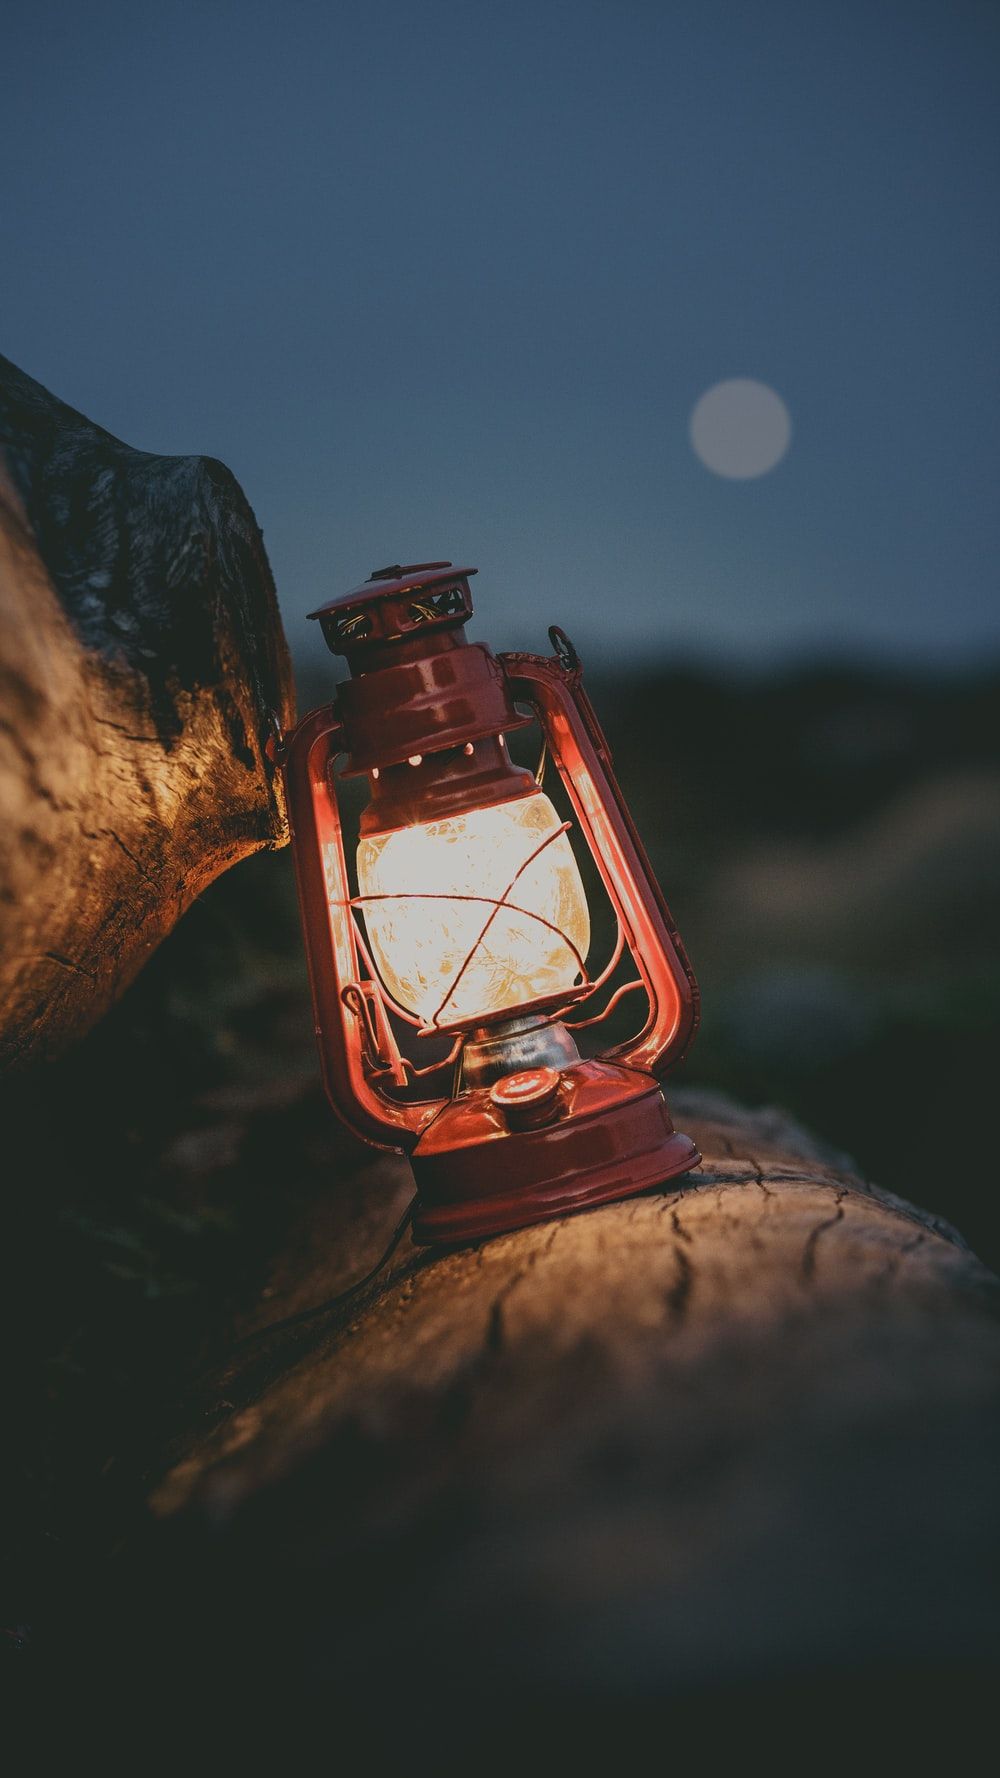 Oil Lamp Picture. Download Free Image